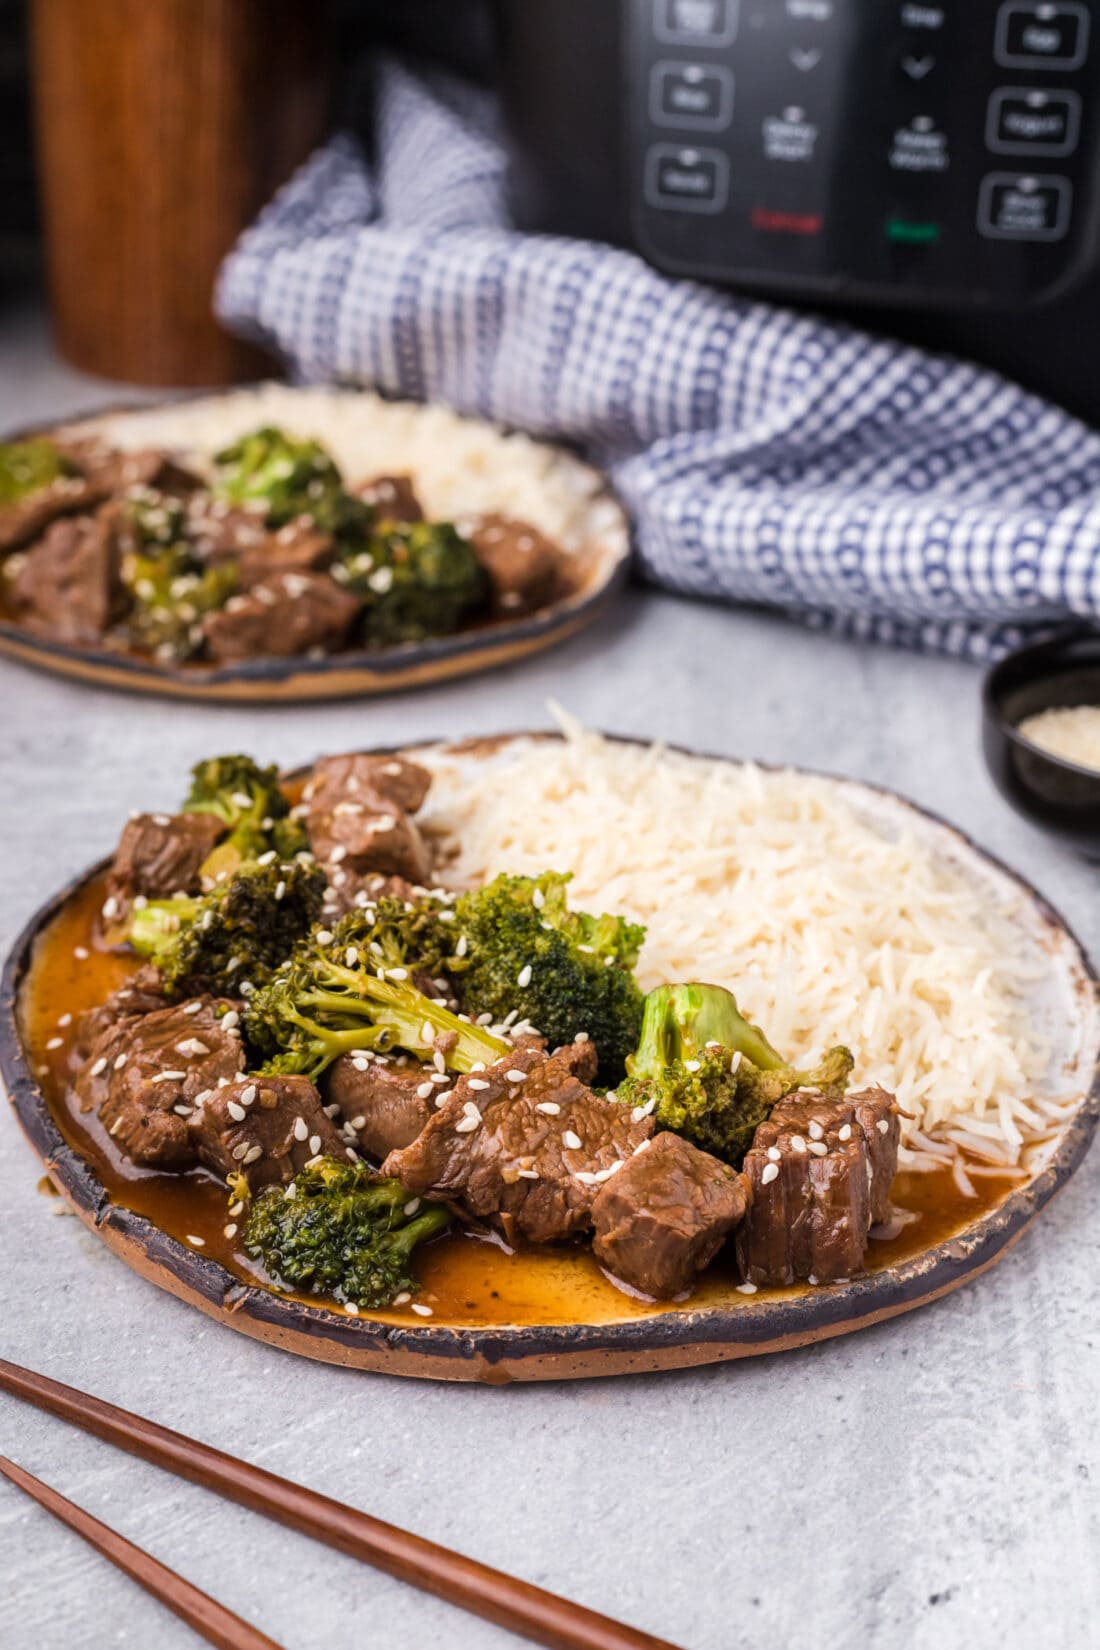 Plate of Instant Pot Beef and Broccoli with rice on the side